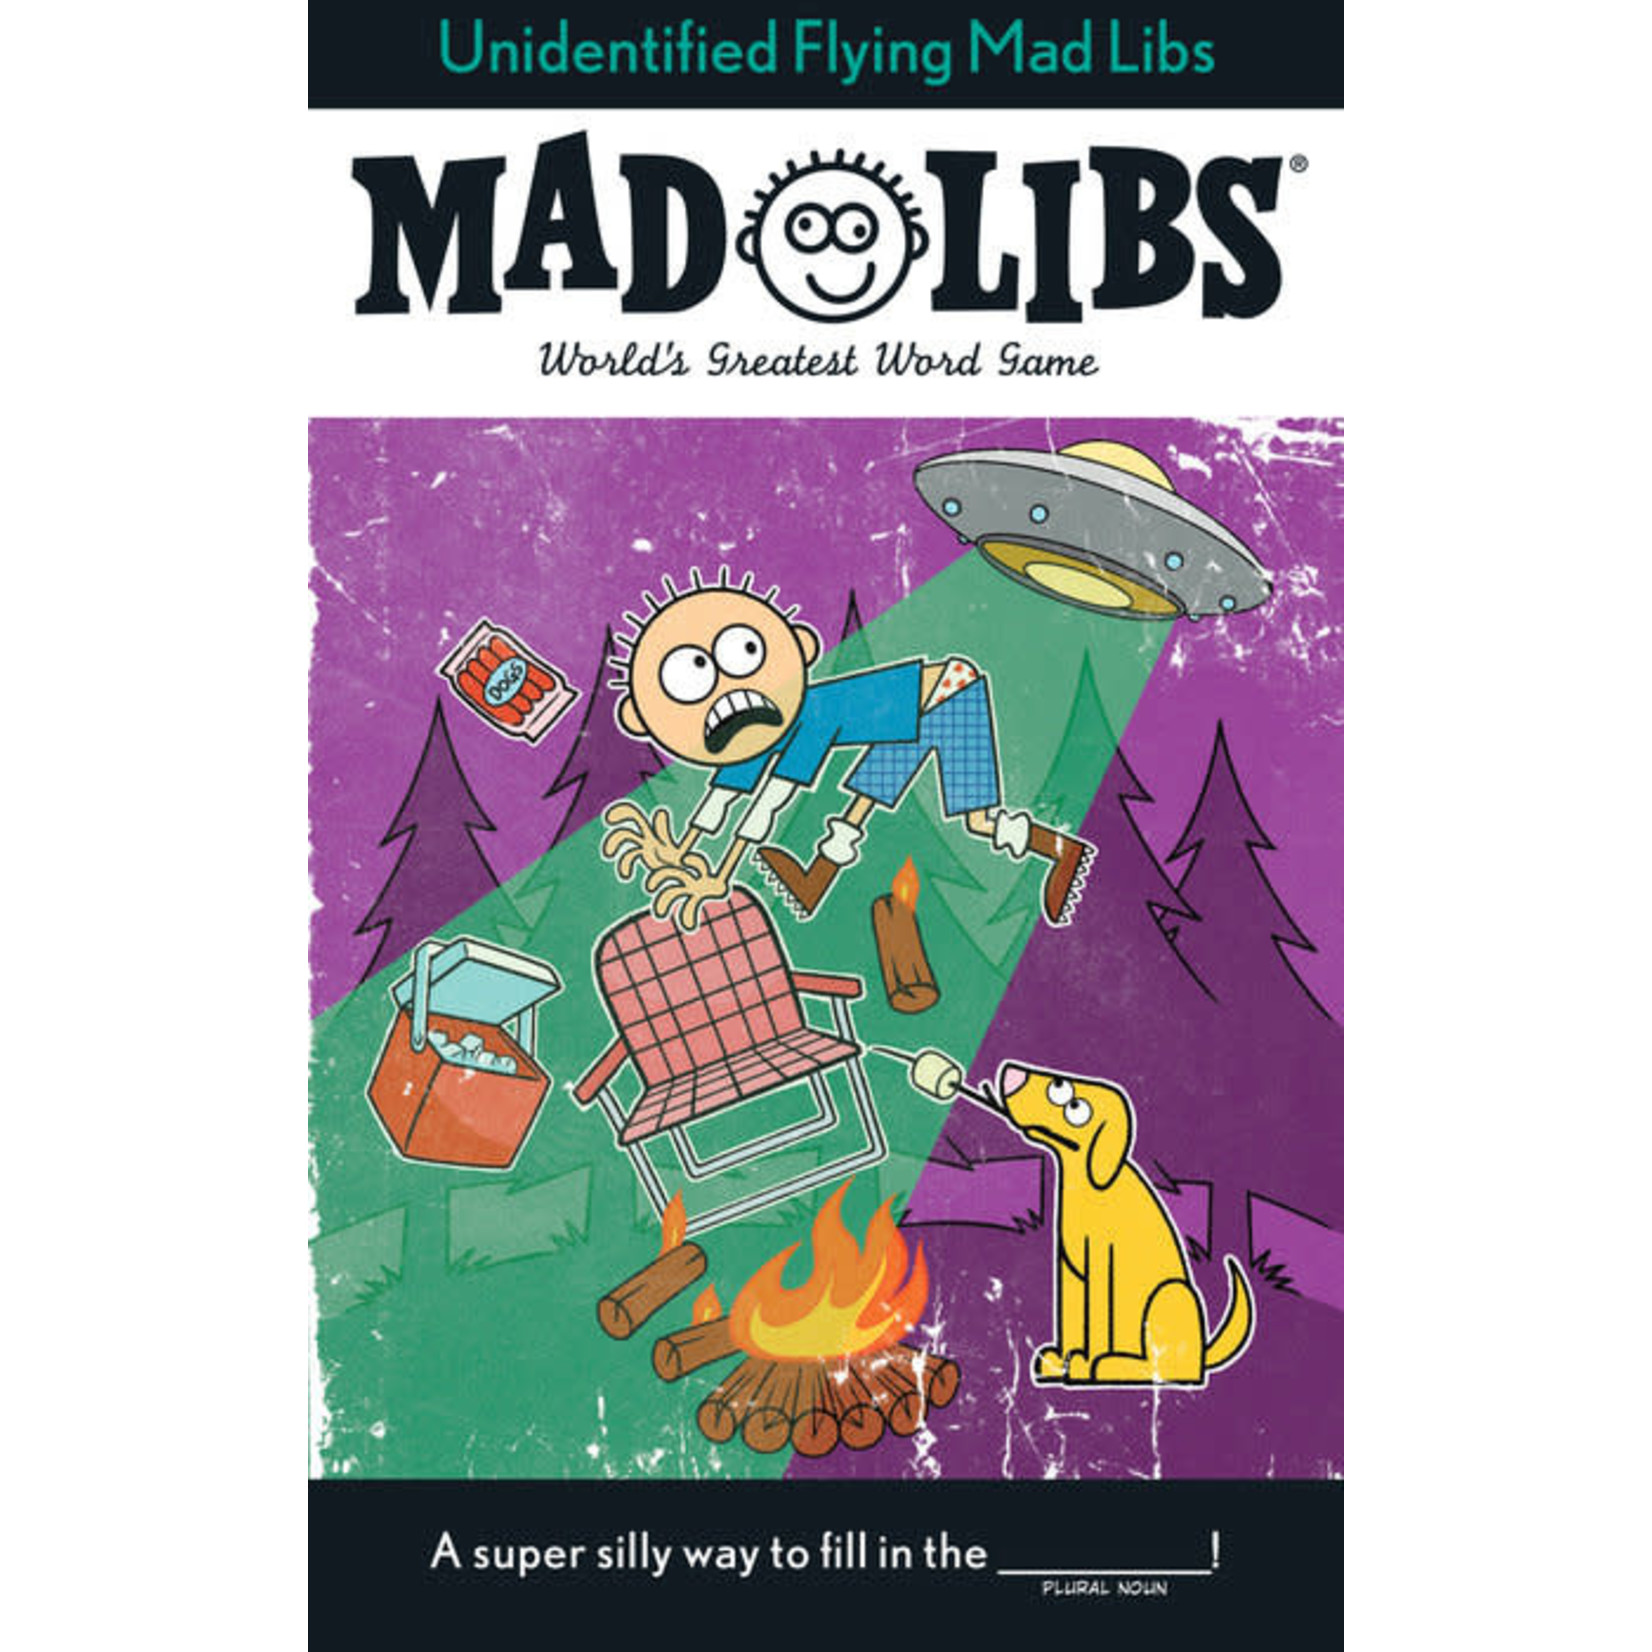 Mad Libs: Unidentified Flying